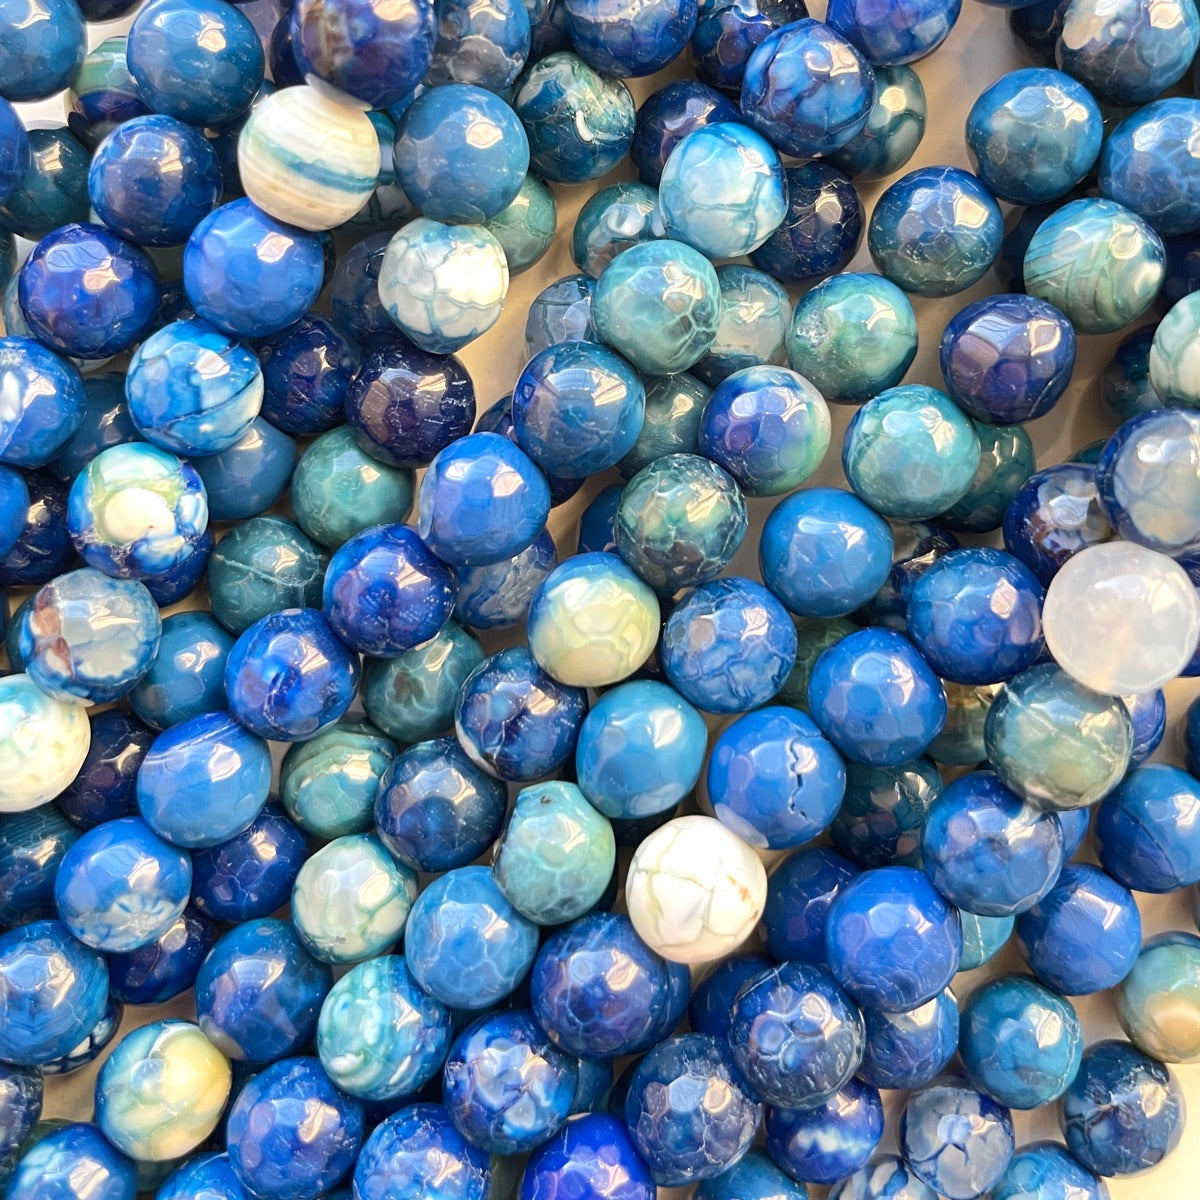 2 Strands/lot 8mm Colorful Cracked Fire Agate Faceted Stone Beads Blue Stone Beads 8mm Stone Beads Faceted Agate Beads New Beads Arrivals Charms Beads Beyond